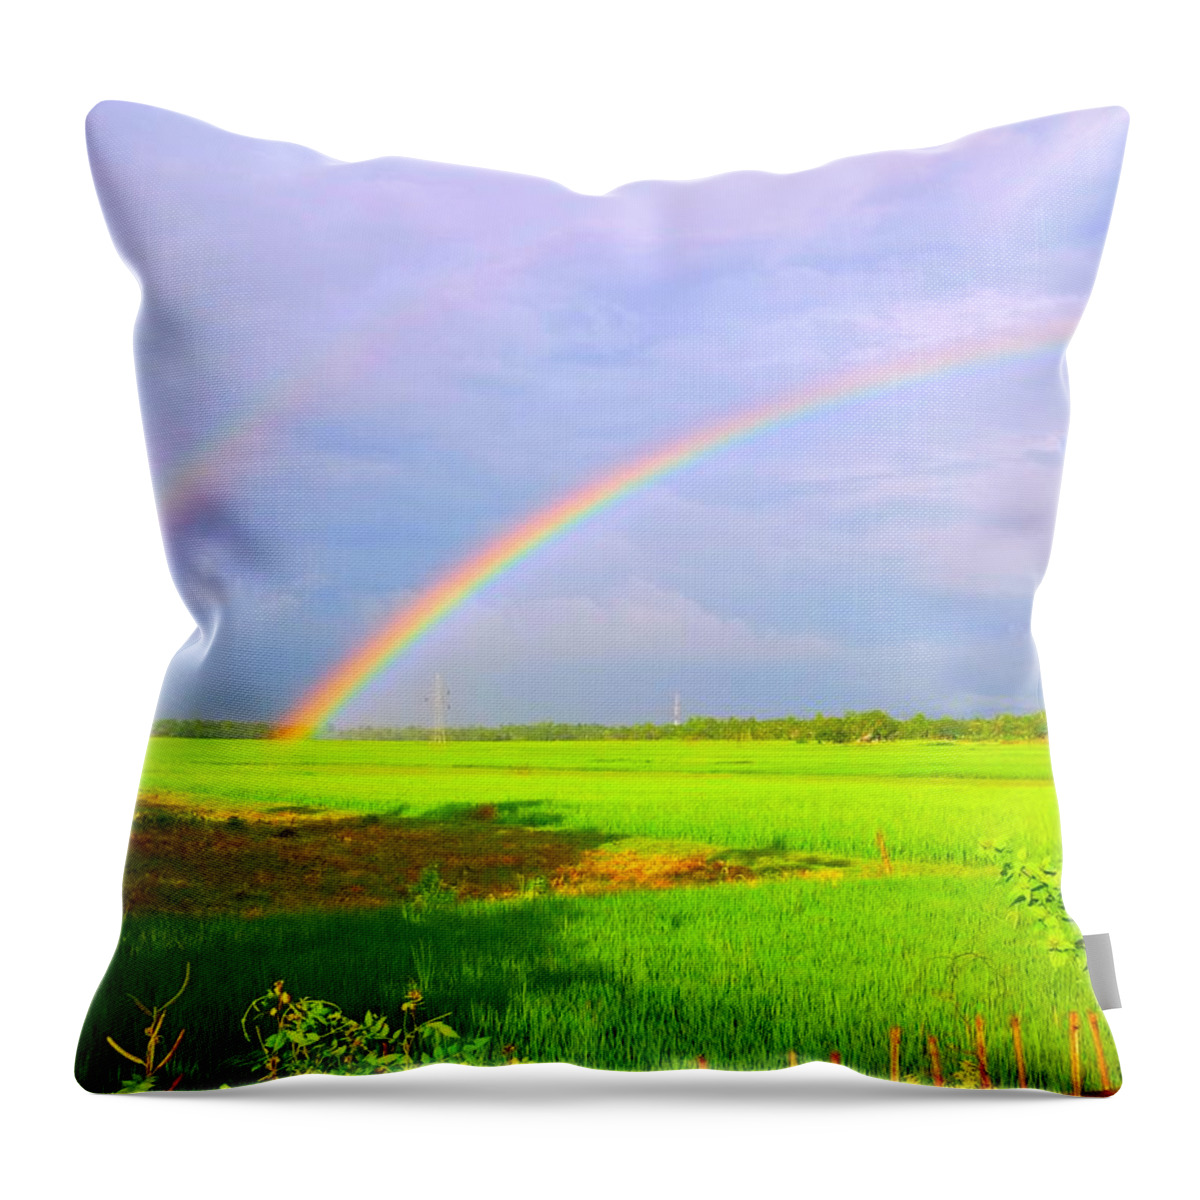 Tranquility Throw Pillow featuring the photograph The Rainbow by Sanhita Bhattacharjee